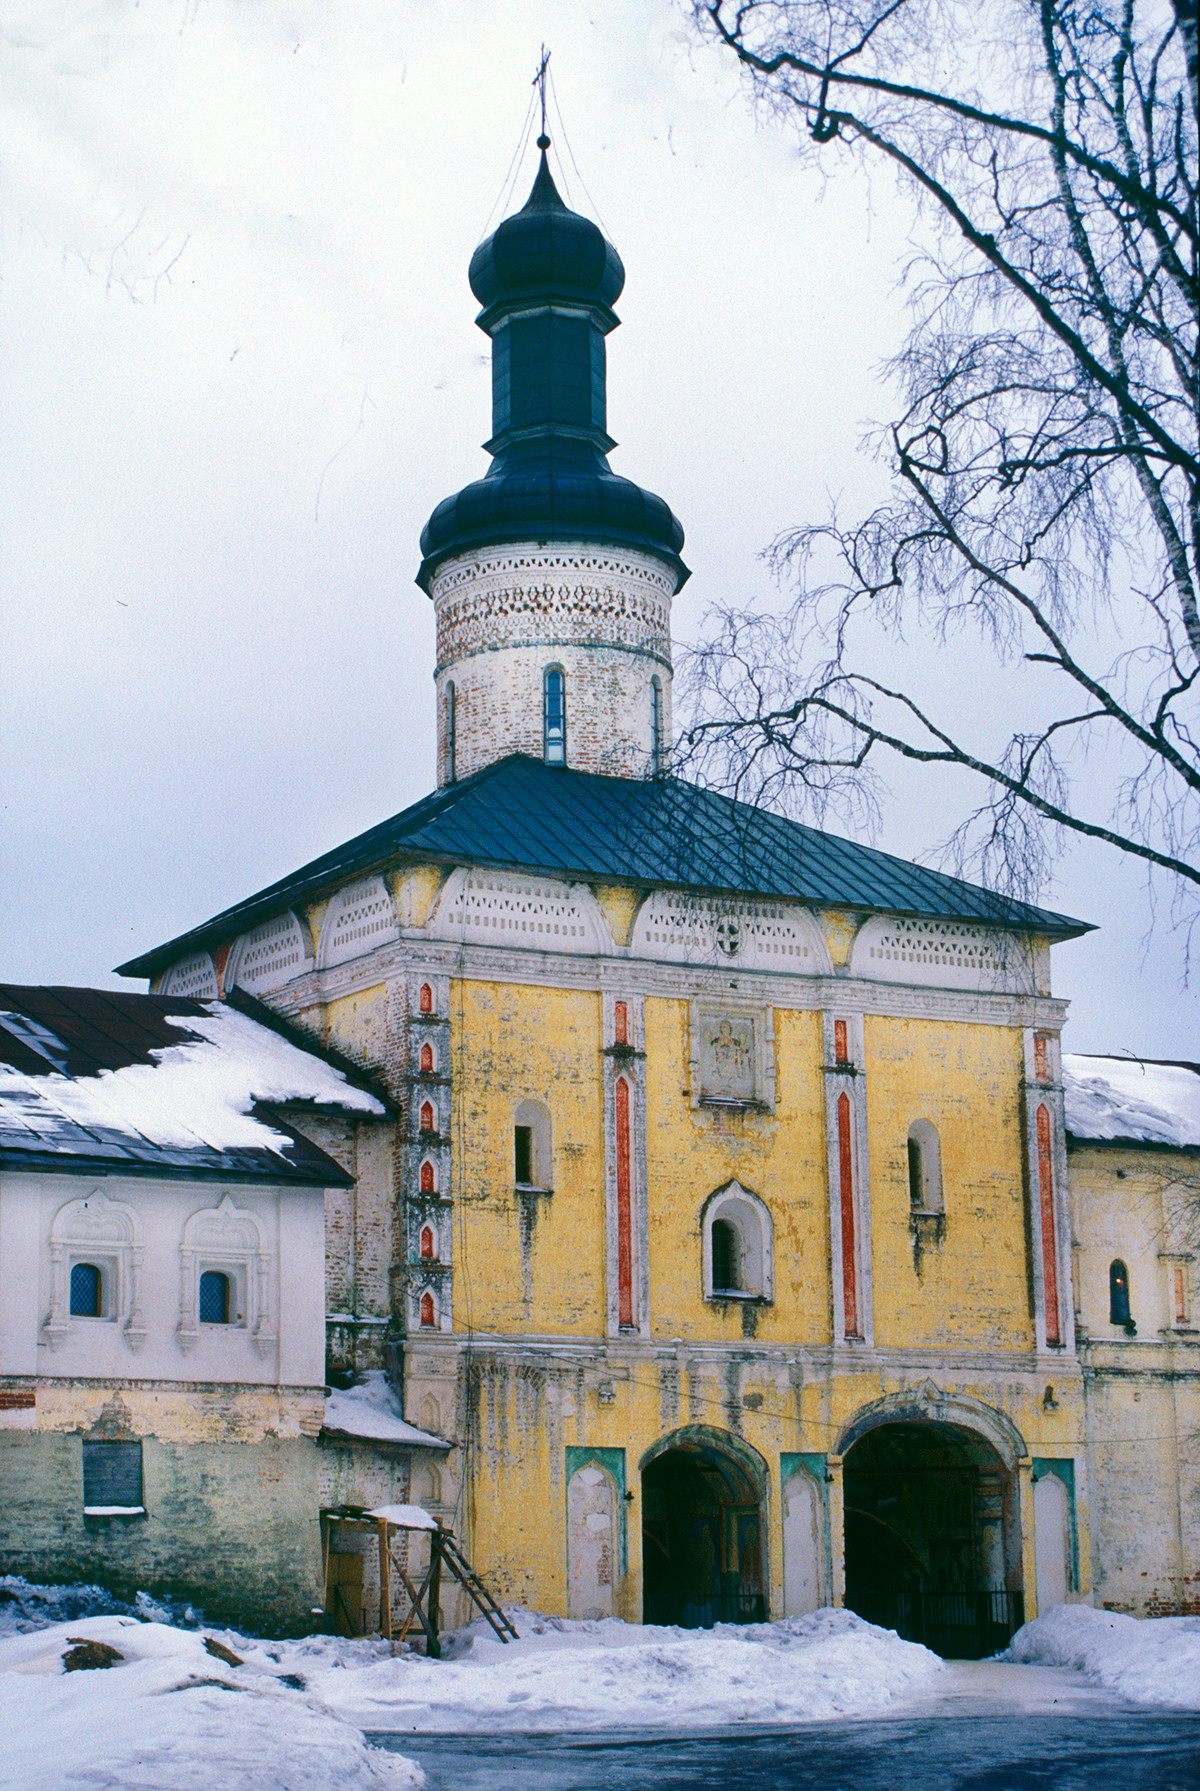 Church of St. John Climacus over Holy Gate, northeast view. April 1, 2001